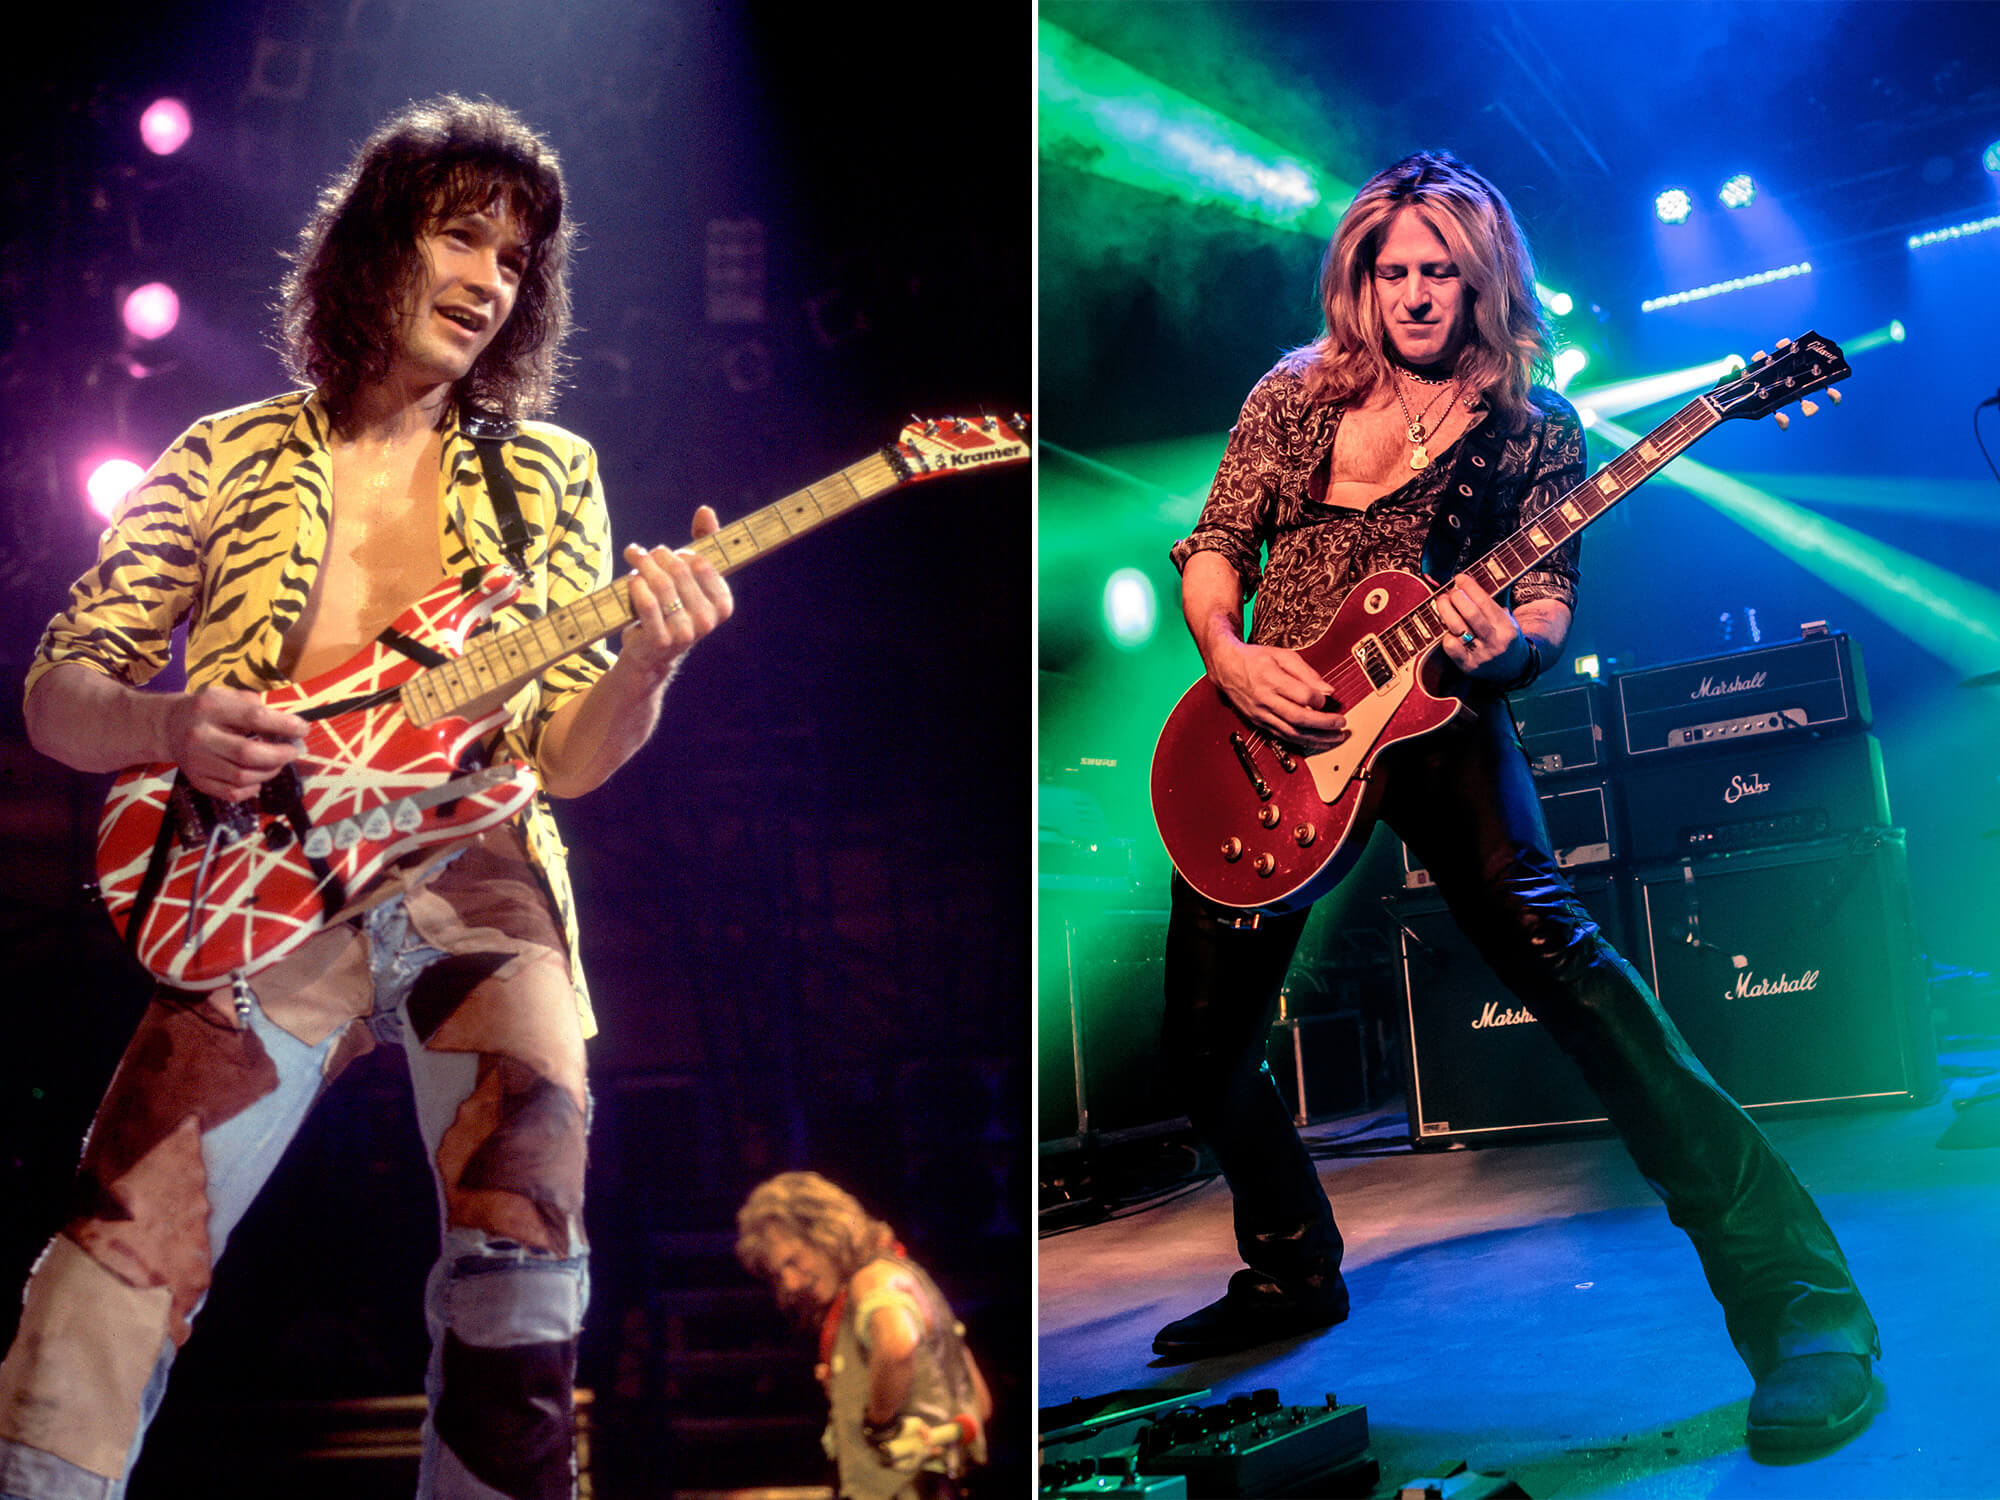 Eddie Van Halen on stage in 1984 (left), and Doug Aldrich on stage playing a Les Paul (right)